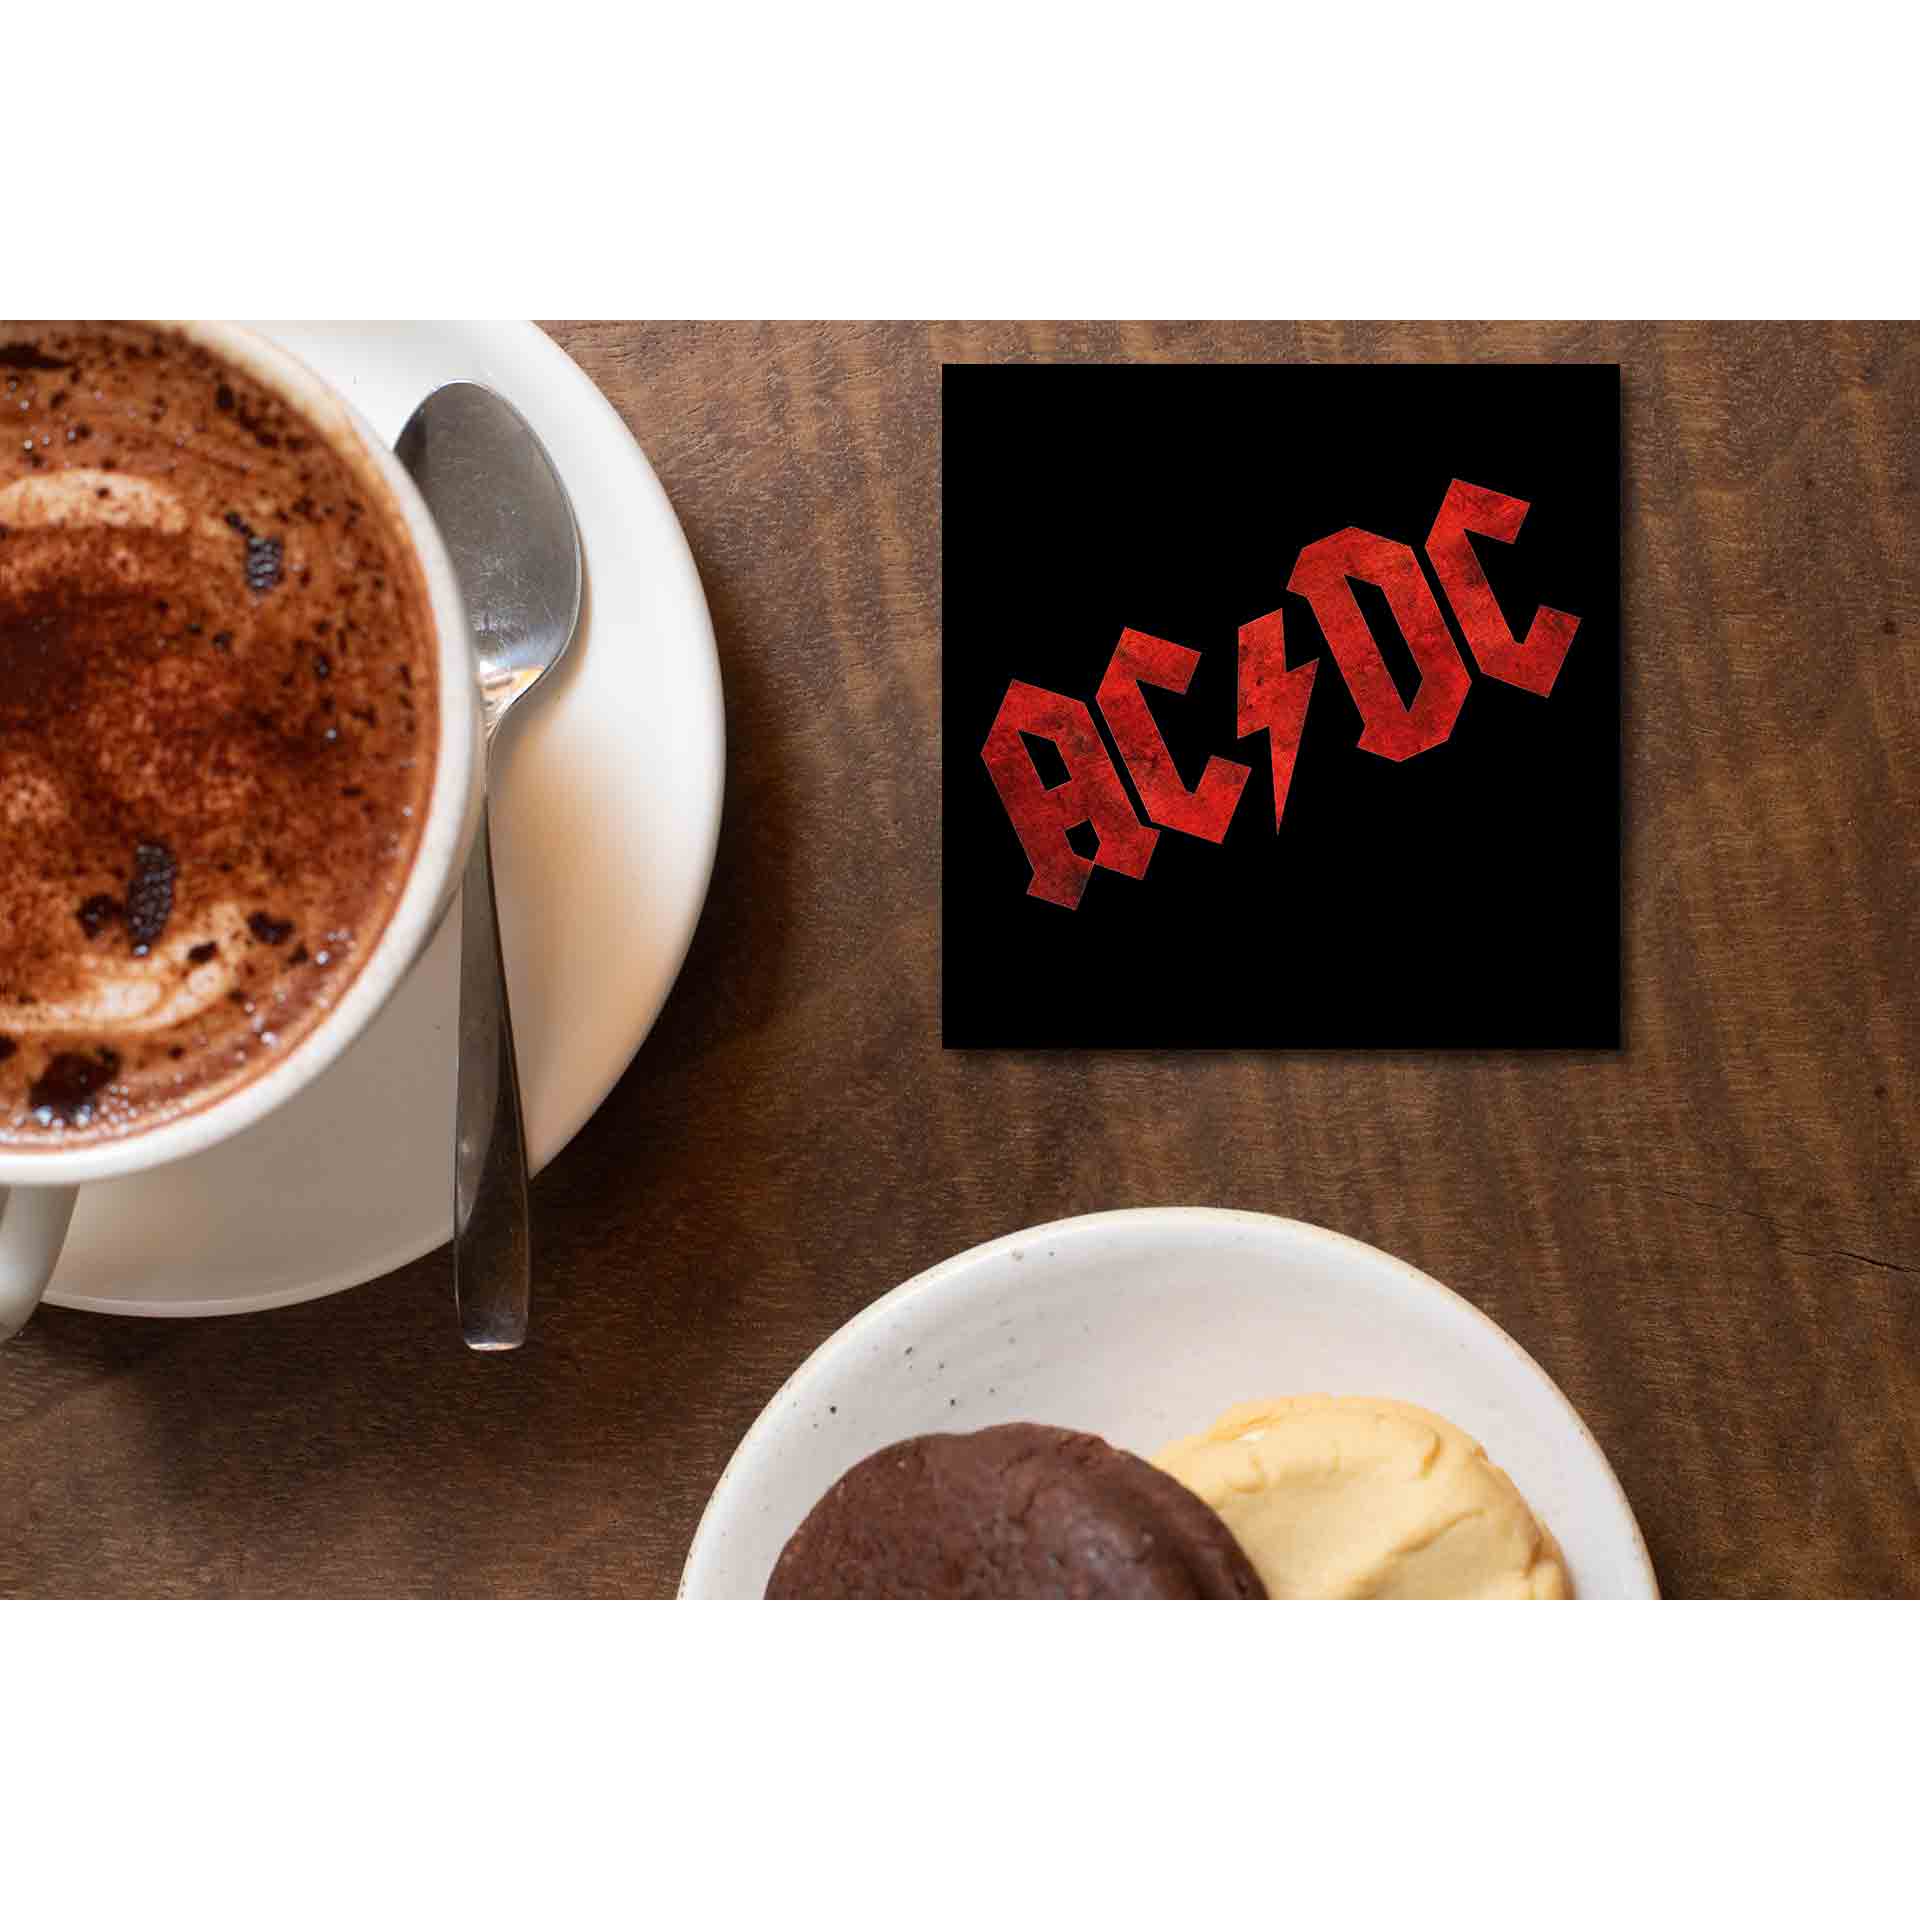 ac/dc rock coasters wooden table cups indian music band buy online india the banyan tee tbt men women girls boys unisex